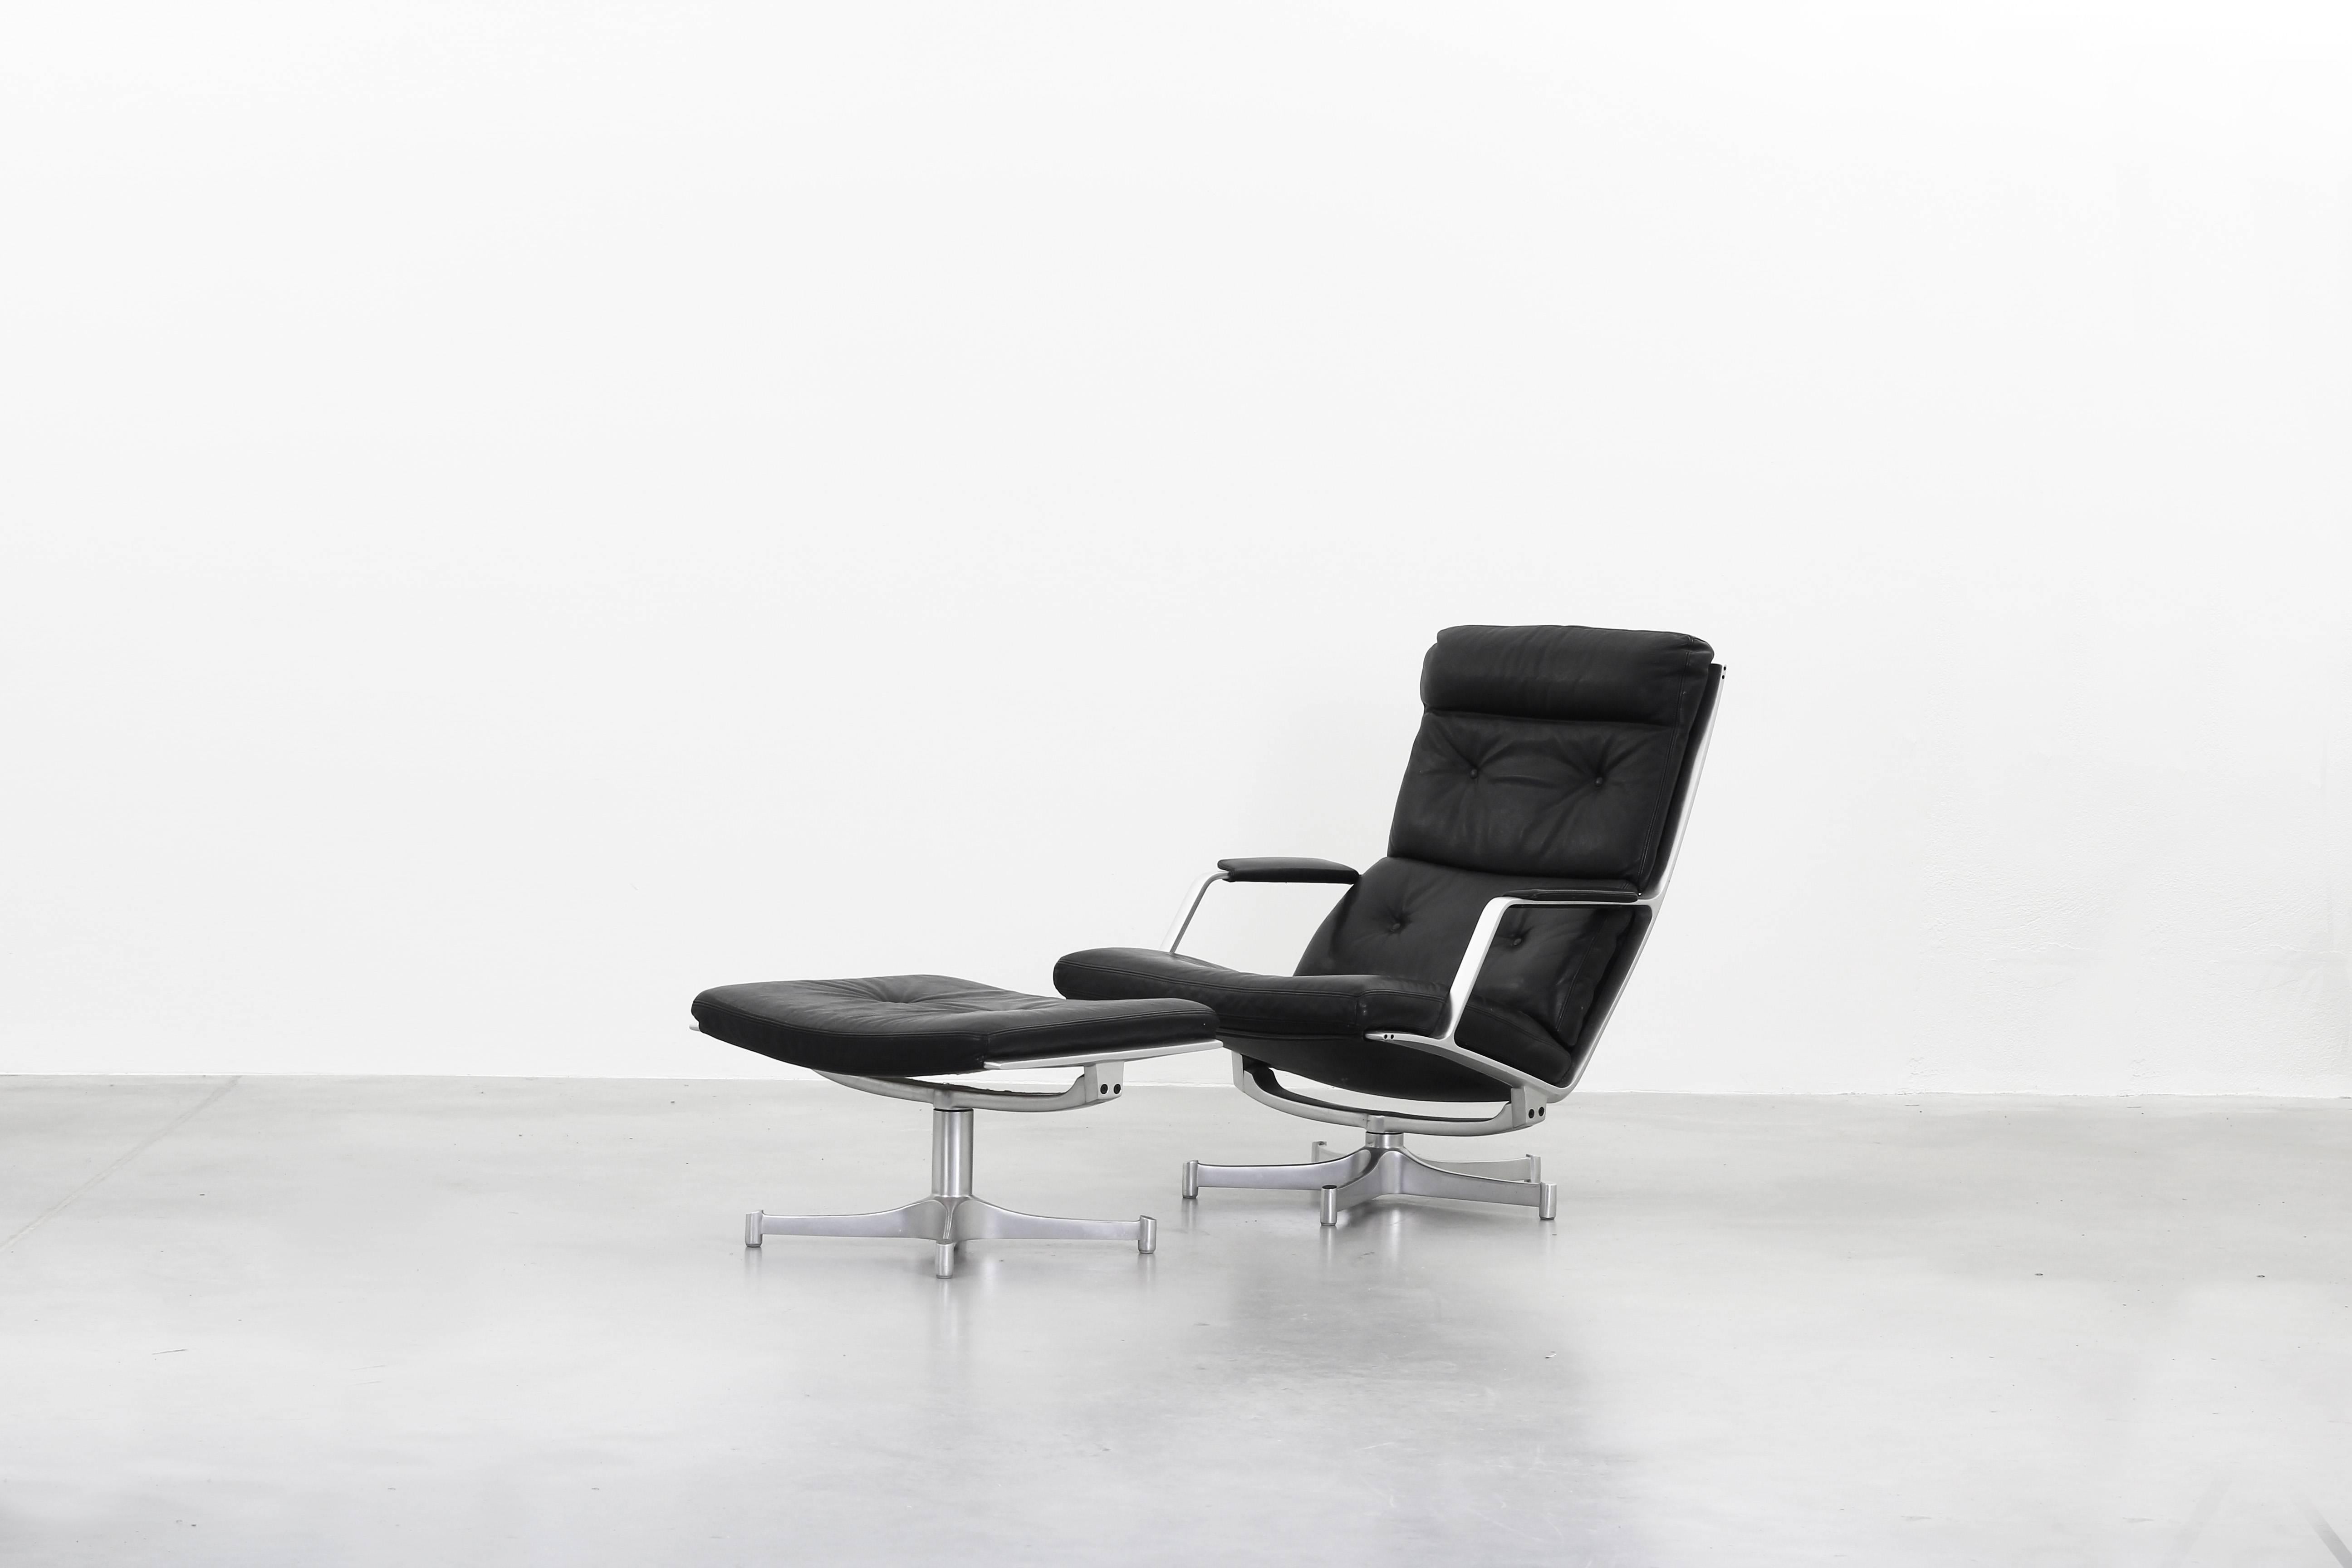 Beautiful lounge chair with Ottoman by Preben Fabricius and Jørgen Kastholm for Kill International, designed in 1968, made in Germany.
The lounge chair is in a very good condition with just little signs of use.
We offer worldwide shipping. Please